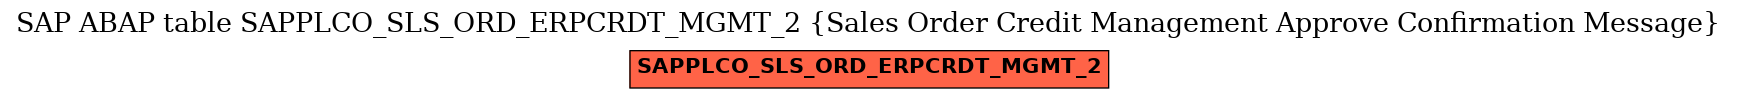 E-R Diagram for table SAPPLCO_SLS_ORD_ERPCRDT_MGMT_2 (Sales Order Credit Management Approve Confirmation Message)